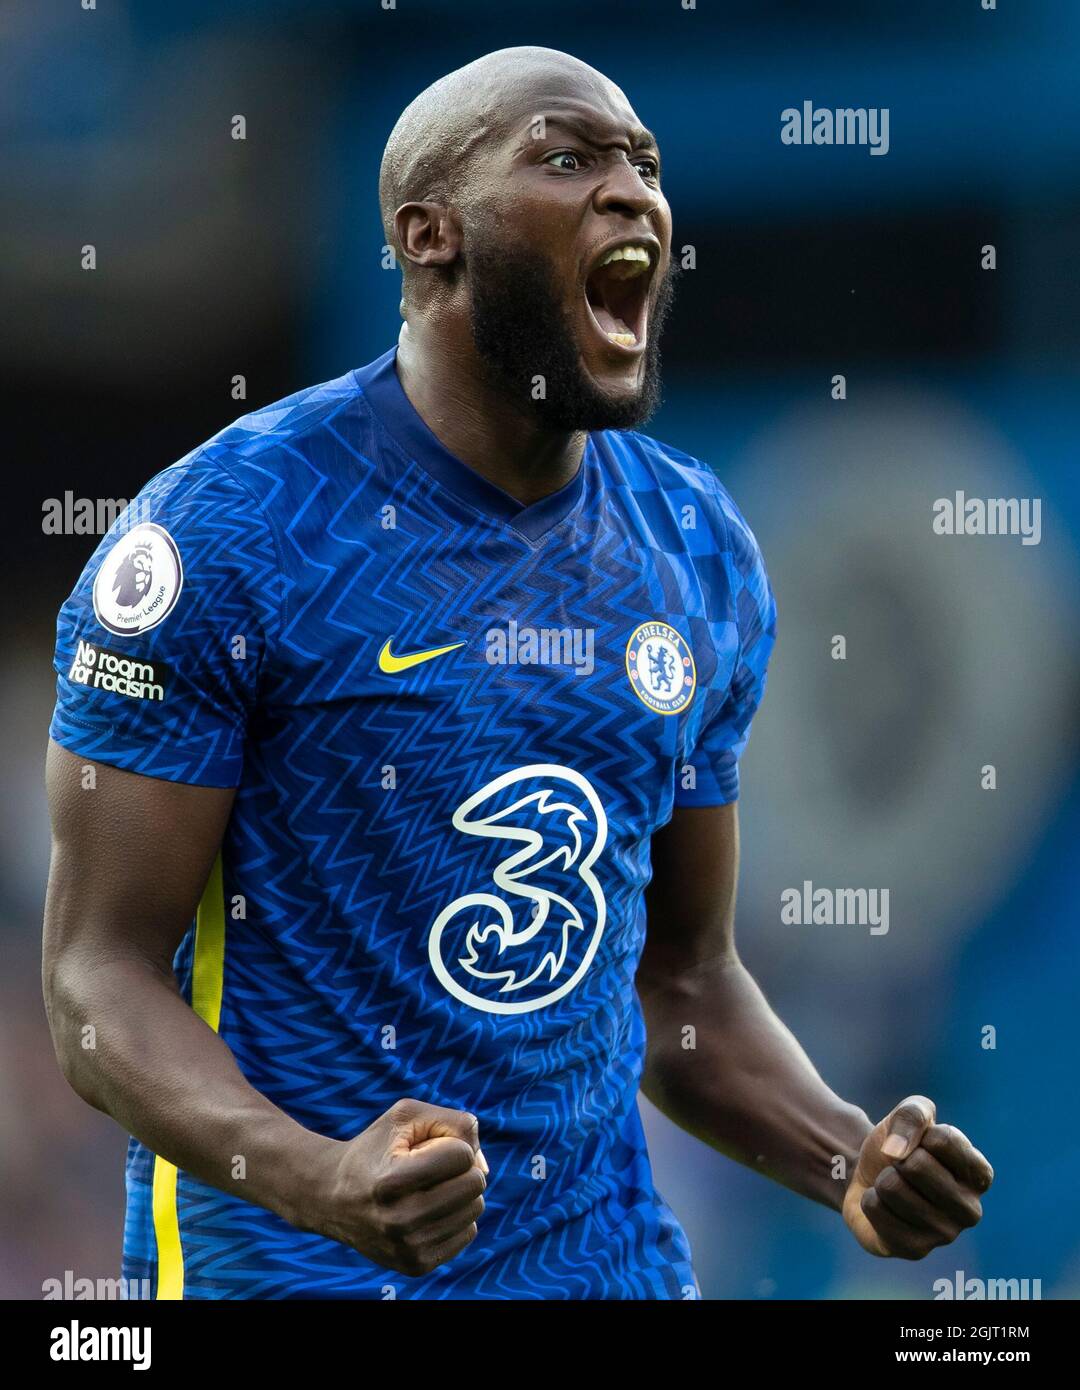 London, Britain. 11th Sep, 2021. Chelsea's Romelu Lukaku celebrates after scoring during the Premier League match between Chelsea and Aston Villa in London, Britain, on Sept. 11, 2021. Credit: Han Yan/Xinhua/Alamy Live News Stock Photo